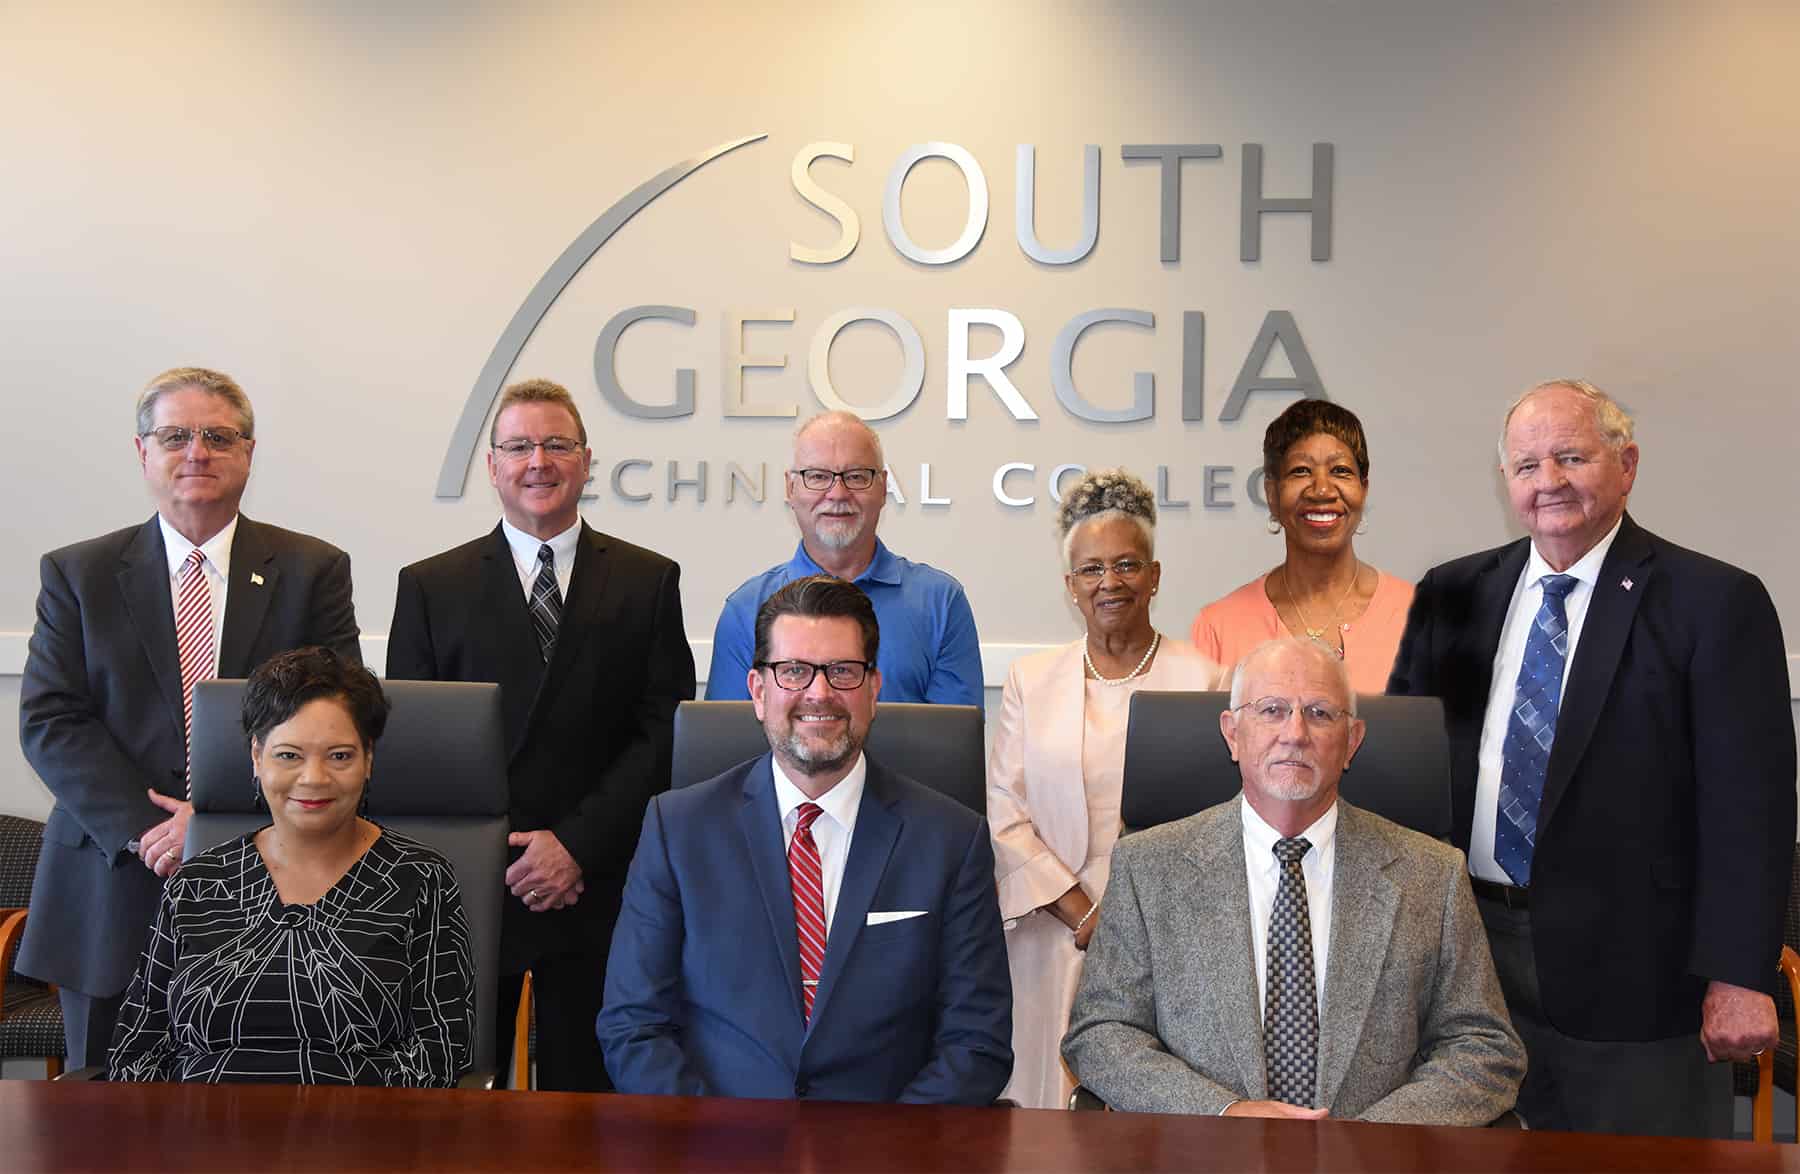 SGTC President Dr. John Watford (seated, second from left) is shown above with the SGTC Board of Directors for 2019 – 2020. Shown seated (l to r) with the Board of Directors is SGTC Executive Assistant to the President Teresa O’Bryant and Dr. Watford along with former Chair Jake Everett. Standing (l to r) is Richard McCorkle, Don Porter, George Bryce, Mattye Gordon, Janet Siders, and incoming chairman Jimmy Davis.